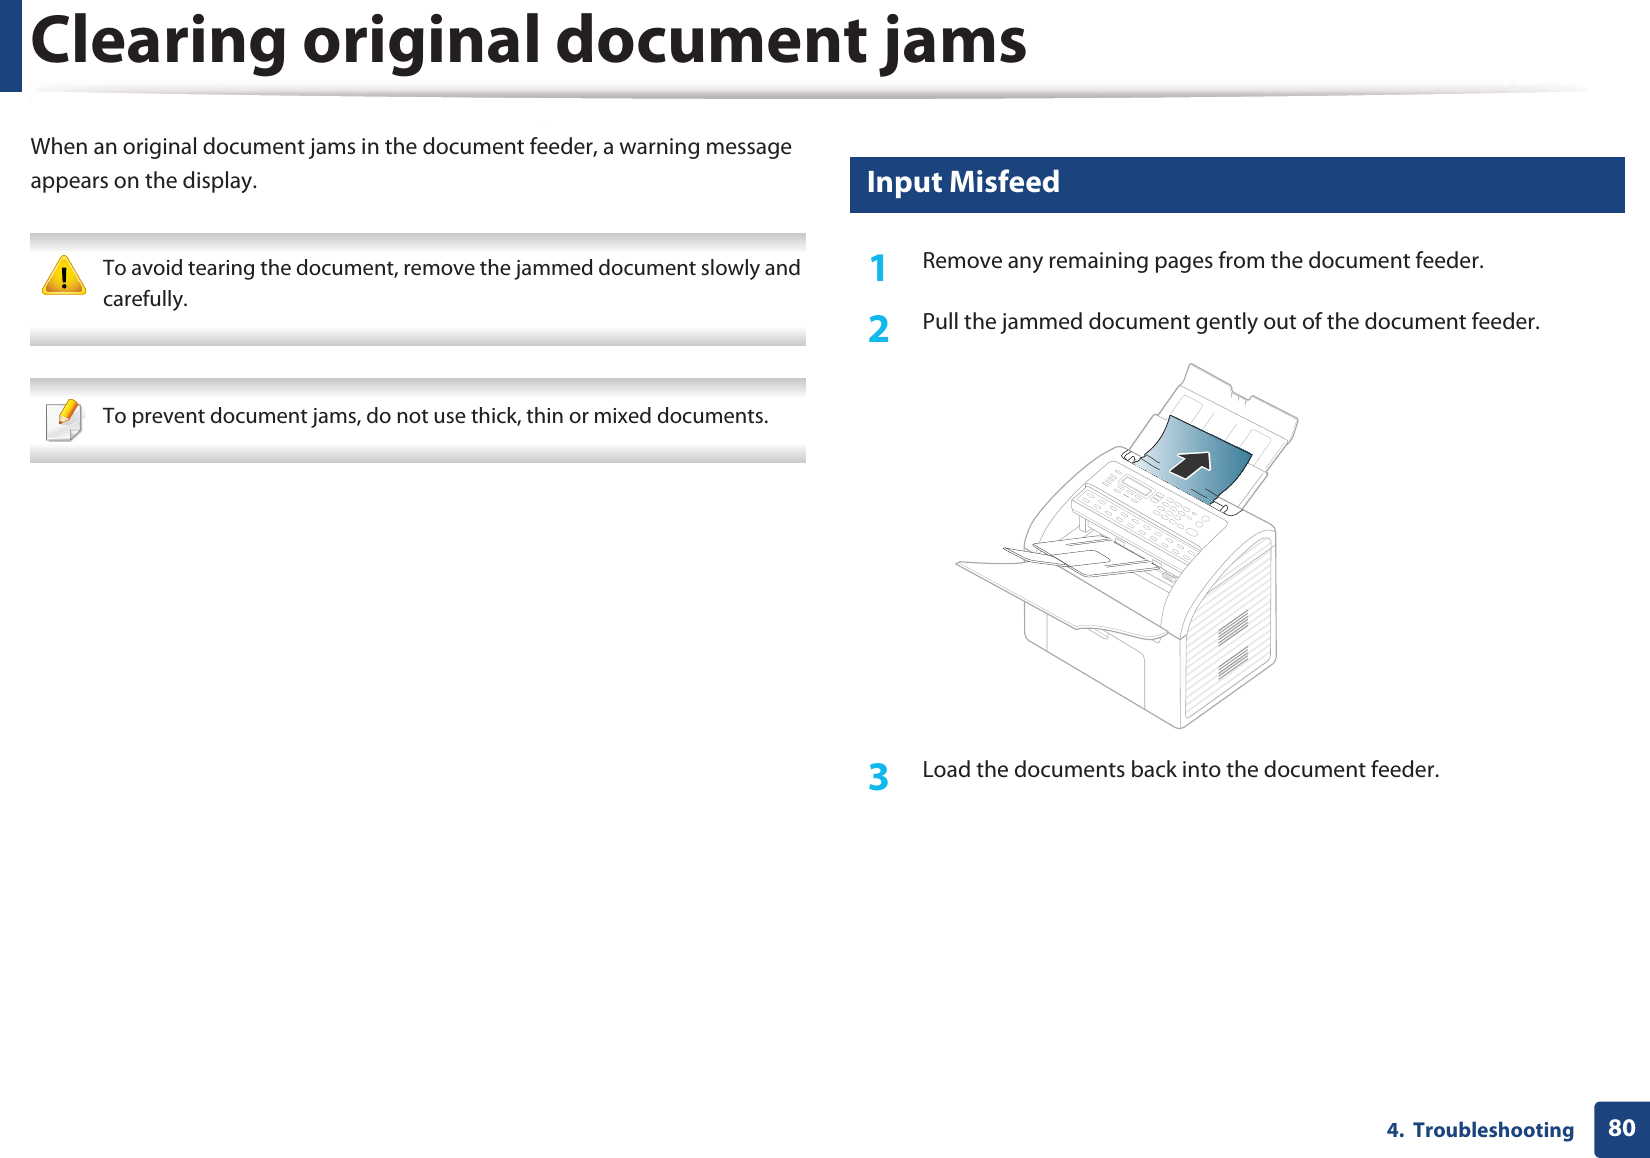 804.  TroubleshootingClearing original document jamsWhen an original document jams in the document feeder, a warning message appears on the display. To avoid tearing the document, remove the jammed document slowly and carefully.  To prevent document jams, do not use thick, thin or mixed documents. 1 Input Misfeed1Remove any remaining pages from the document feeder.2  Pull the jammed document gently out of the document feeder.3  Load the documents back into the document feeder.